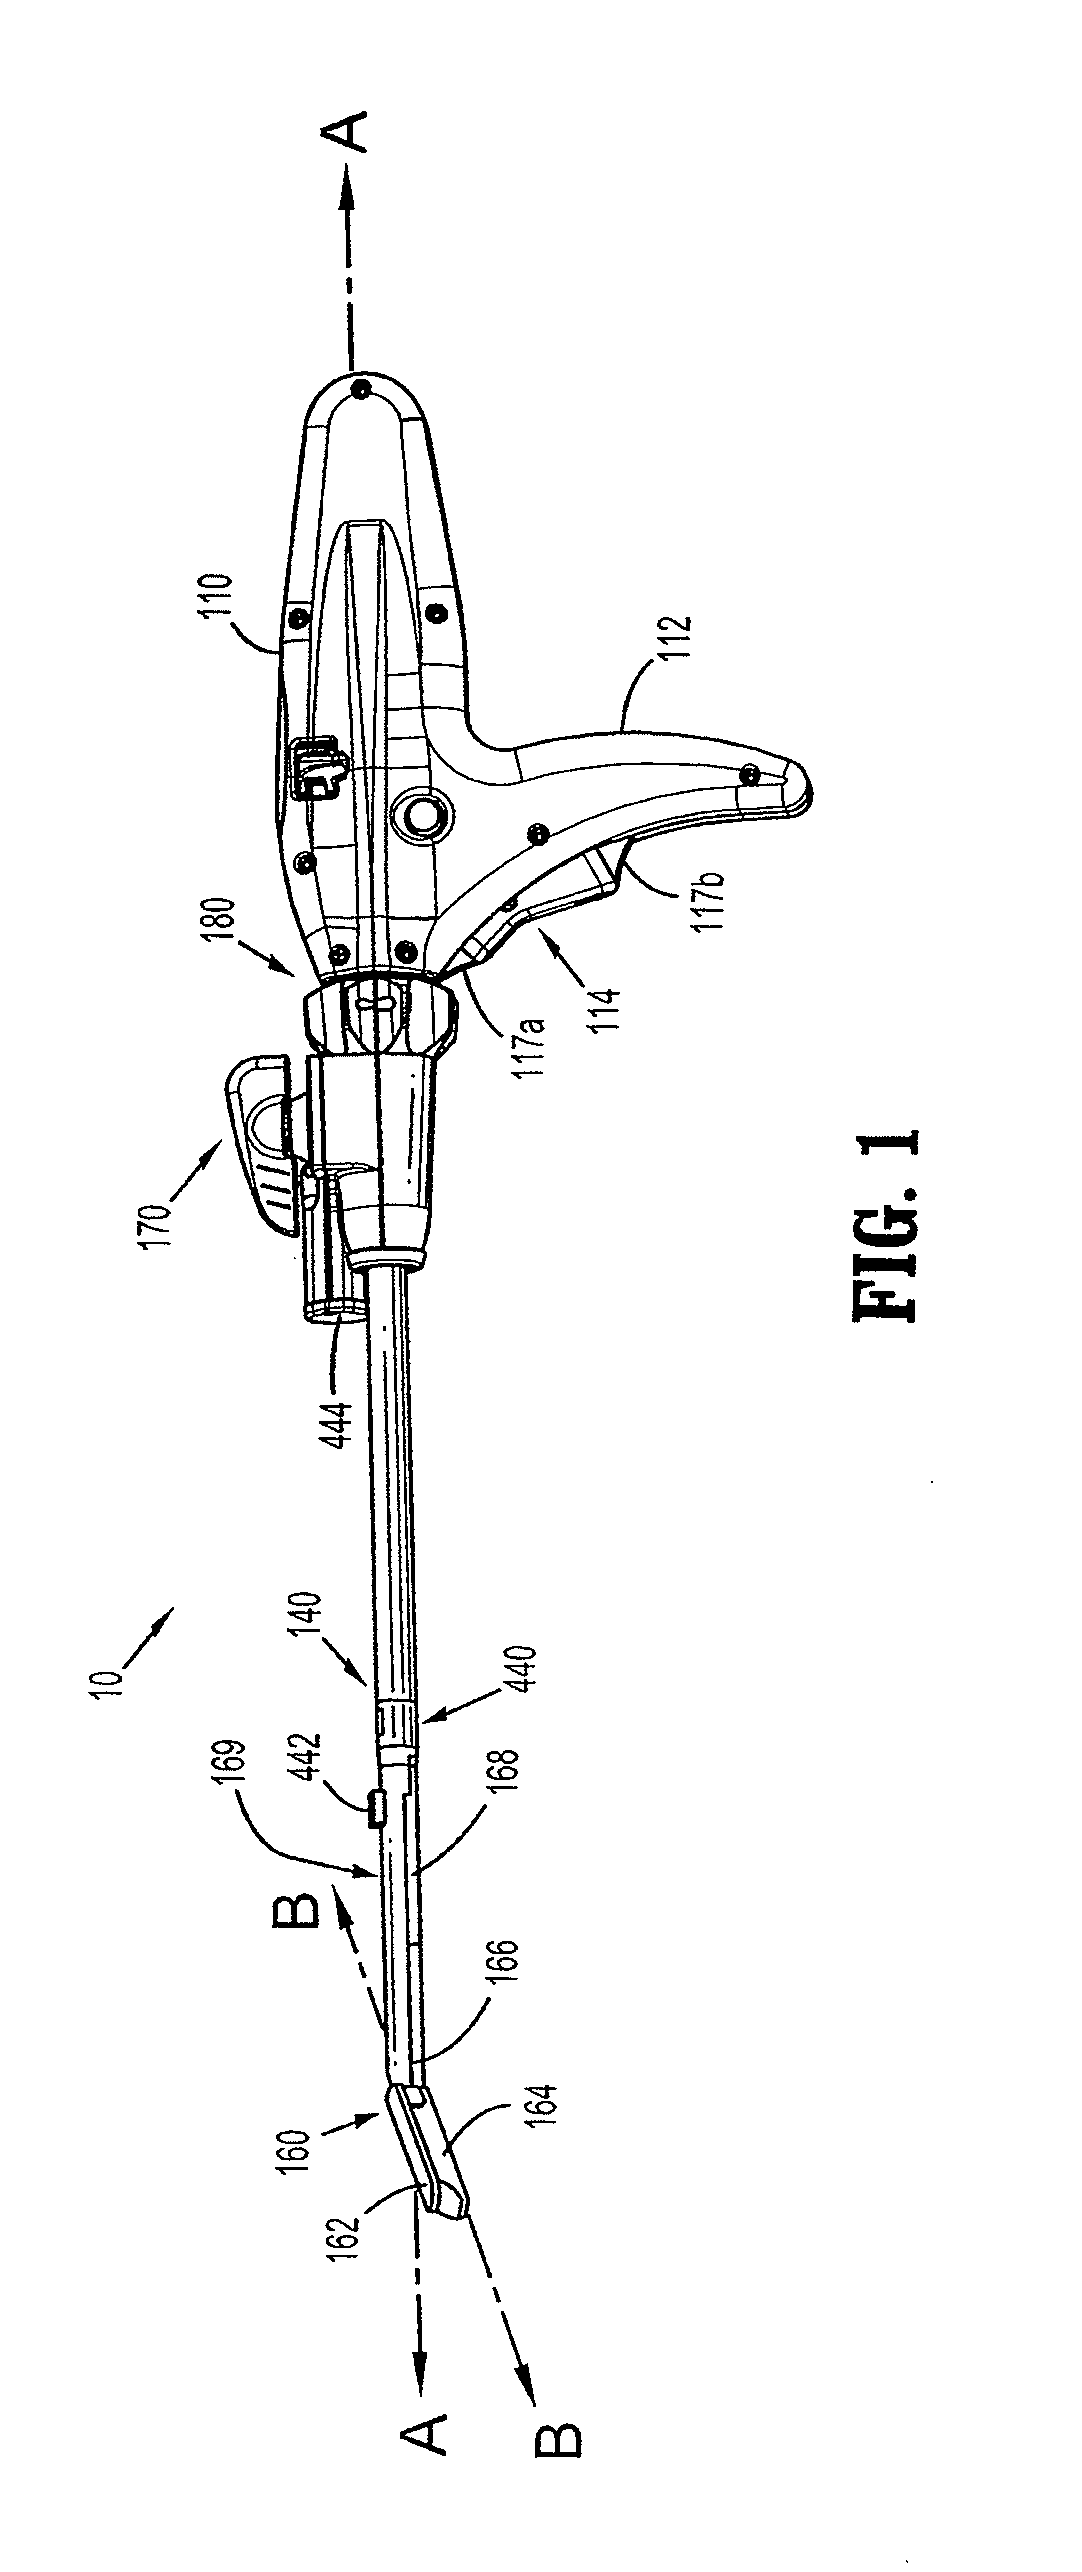 Internal backbone structural chassis for a surgical device